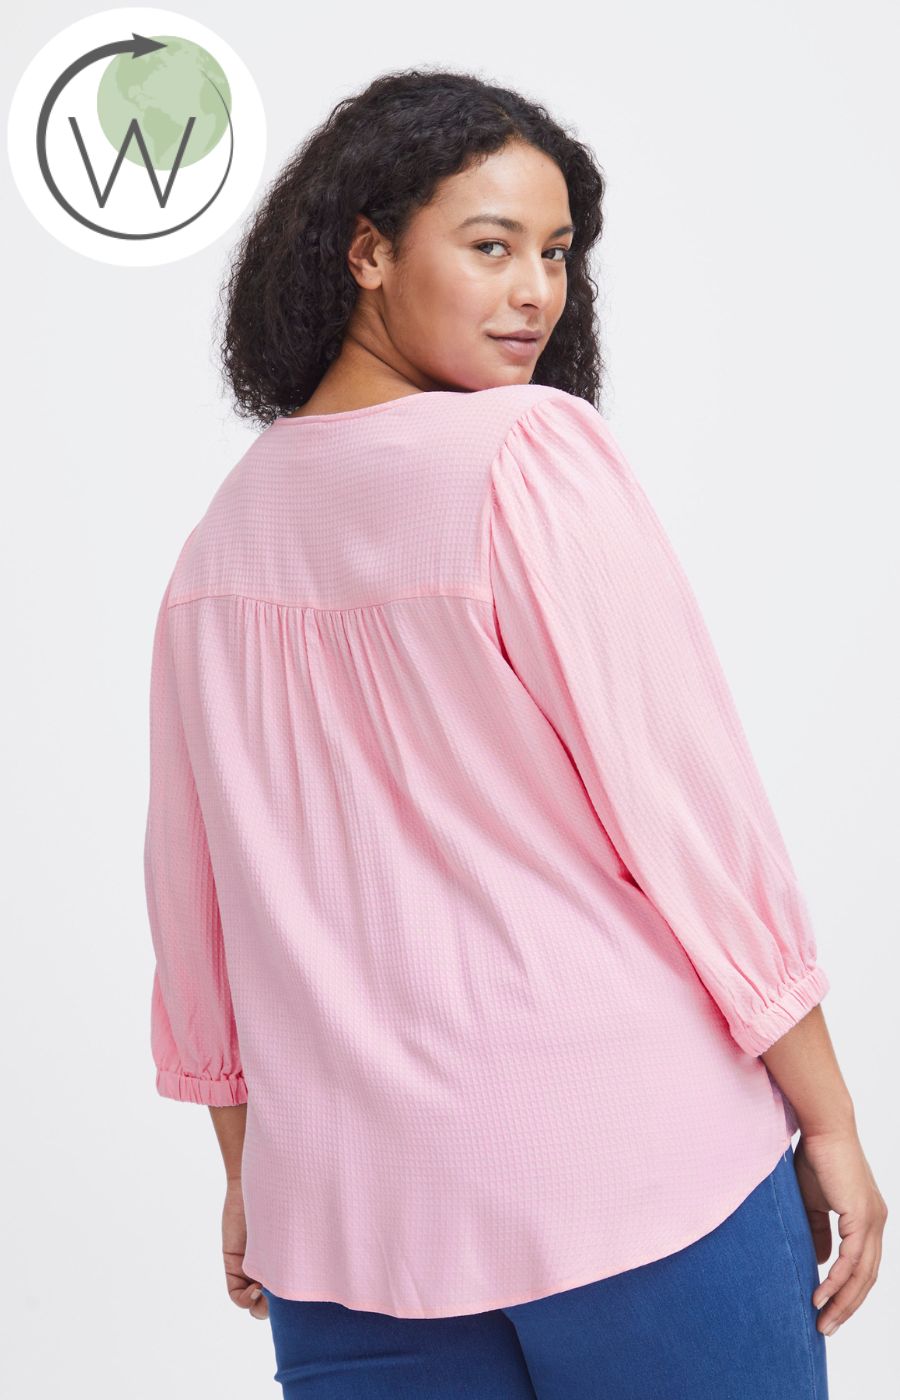 Simple Wish Oline Blouse in Pink